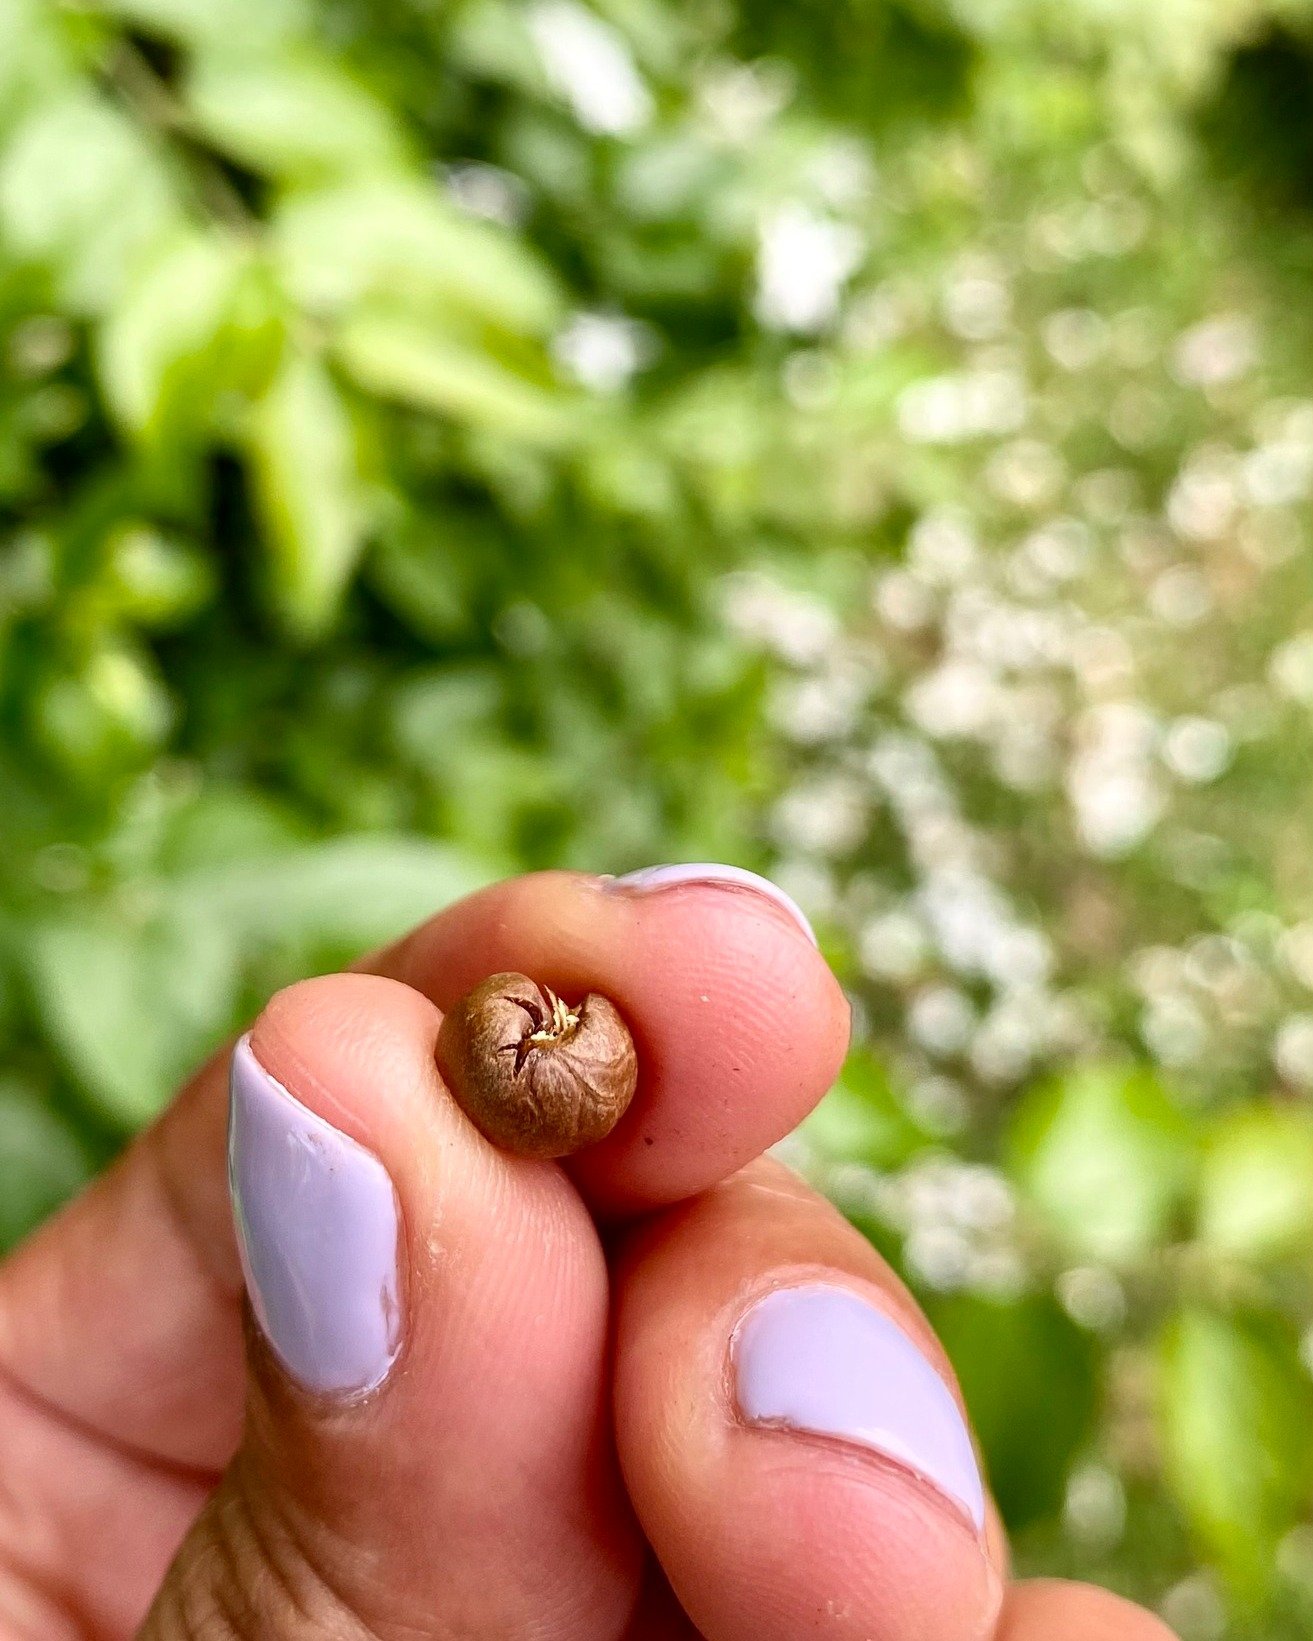 The cutest coffeebeans ever, peaberries! 
A #peaberry coffee bean is a unique type of coffee bean that develops when only one seed, rather than the usual two, forms inside the coffee cherry. What distinguishes peaberry beans is their smaller size and